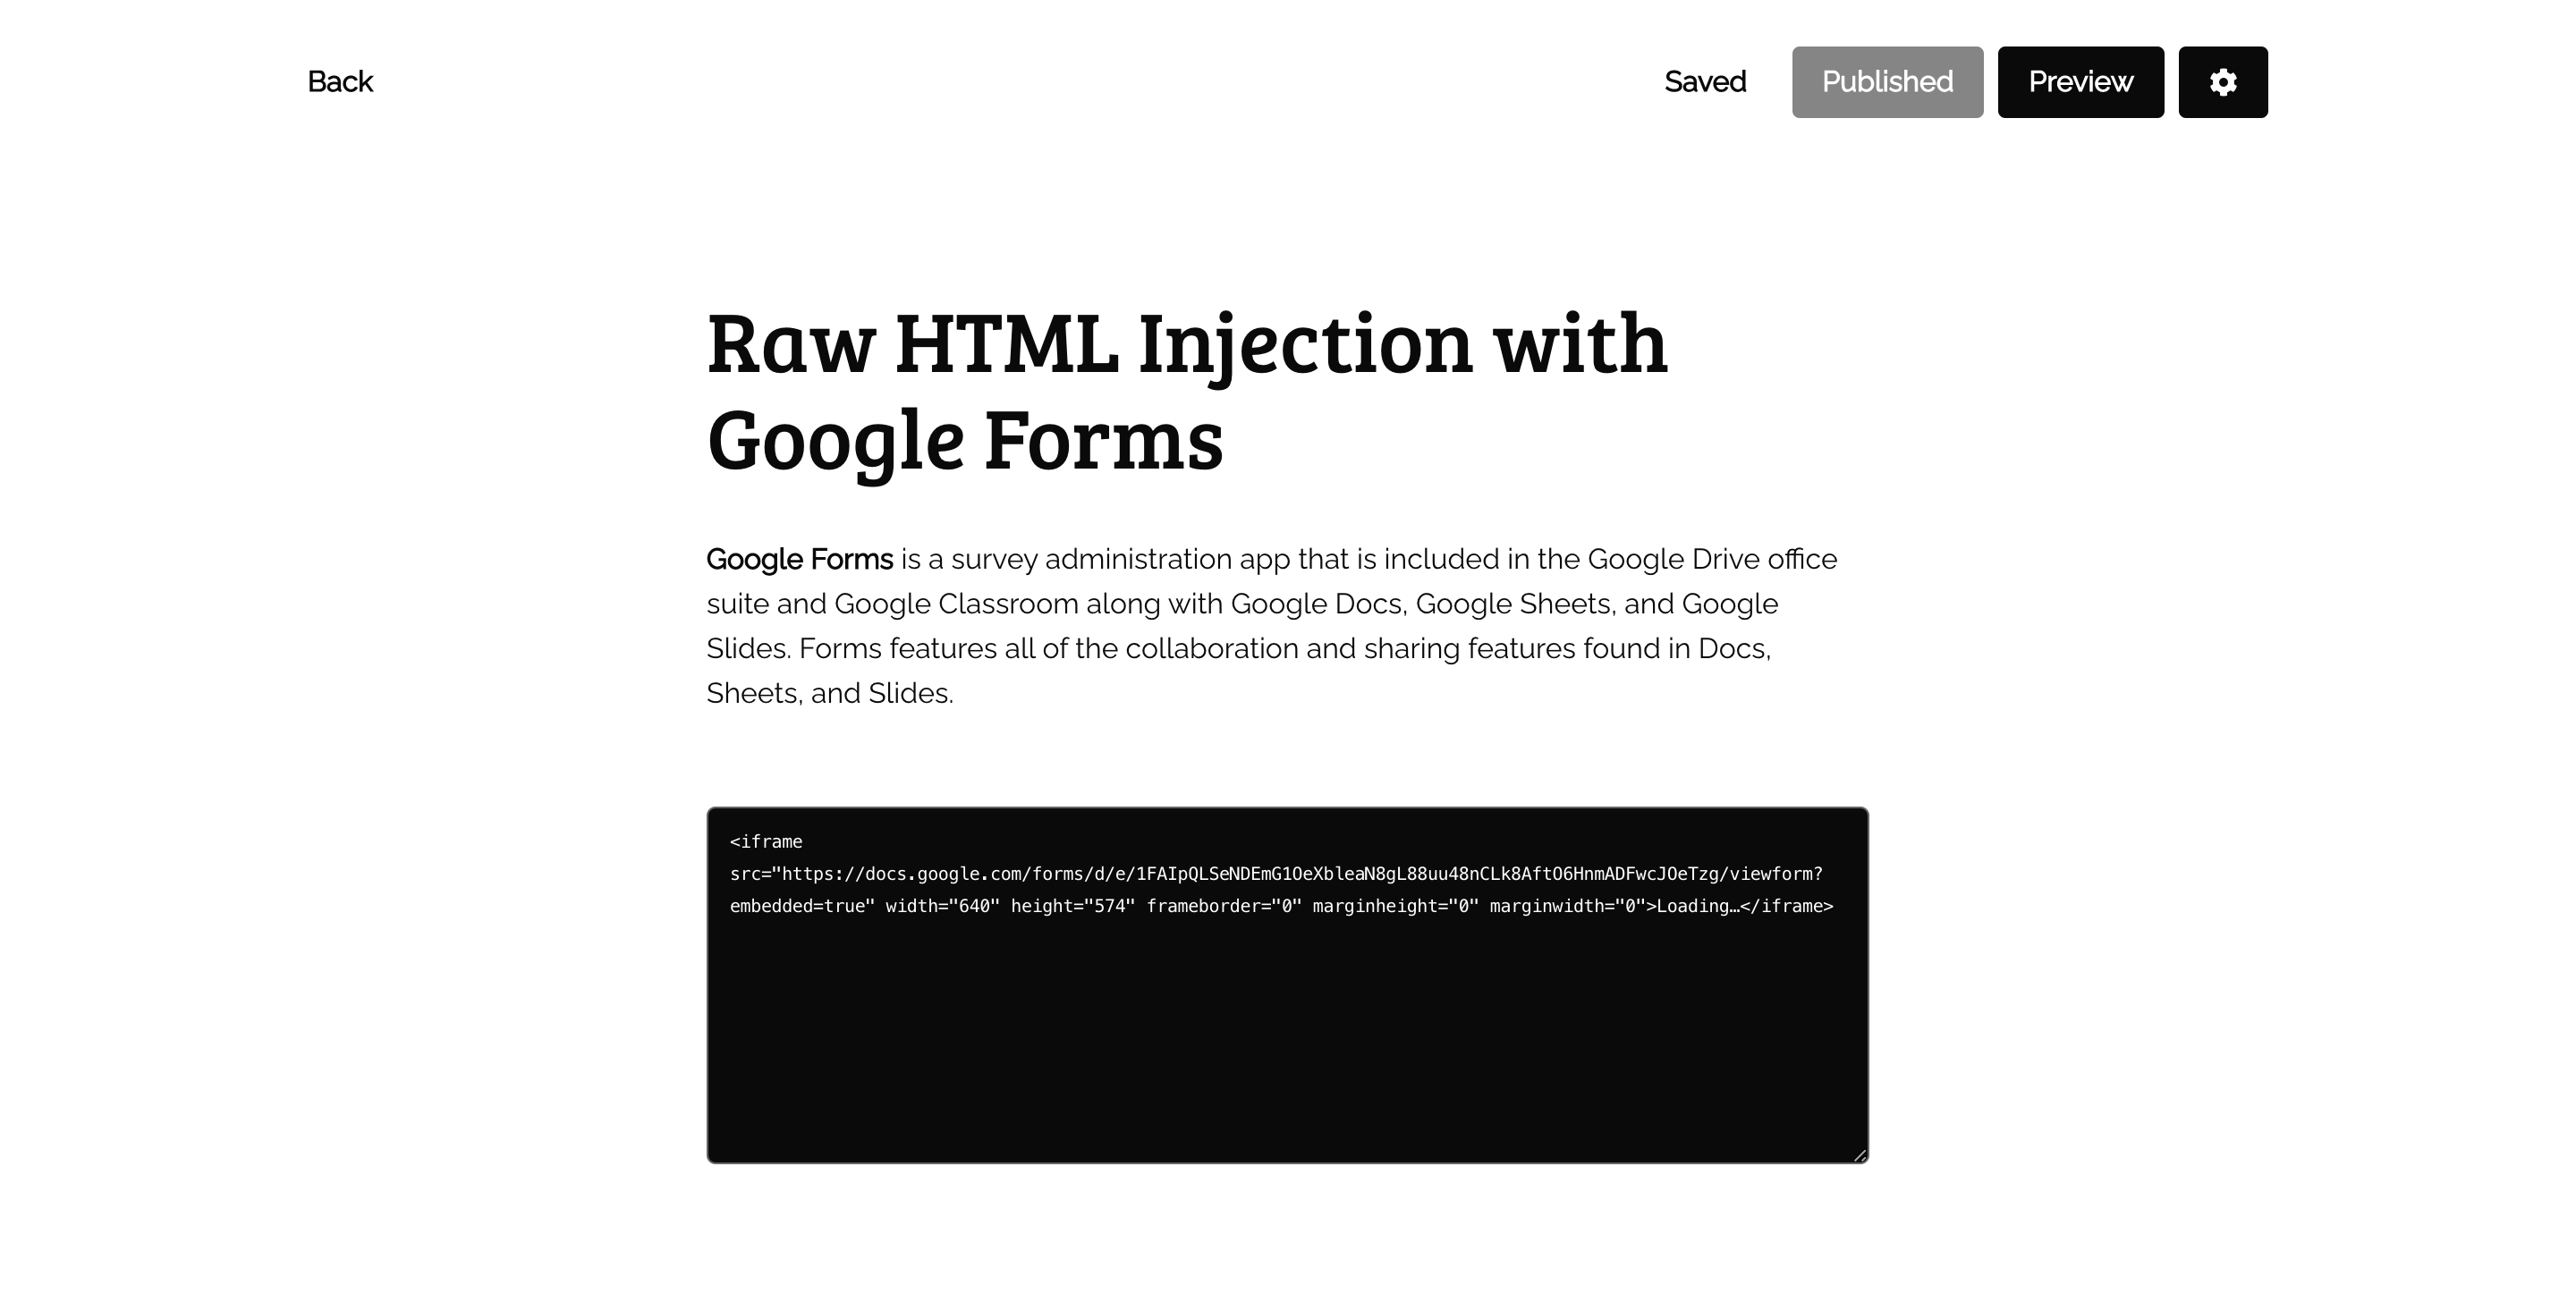 Raw HTML Injection with Google Forms